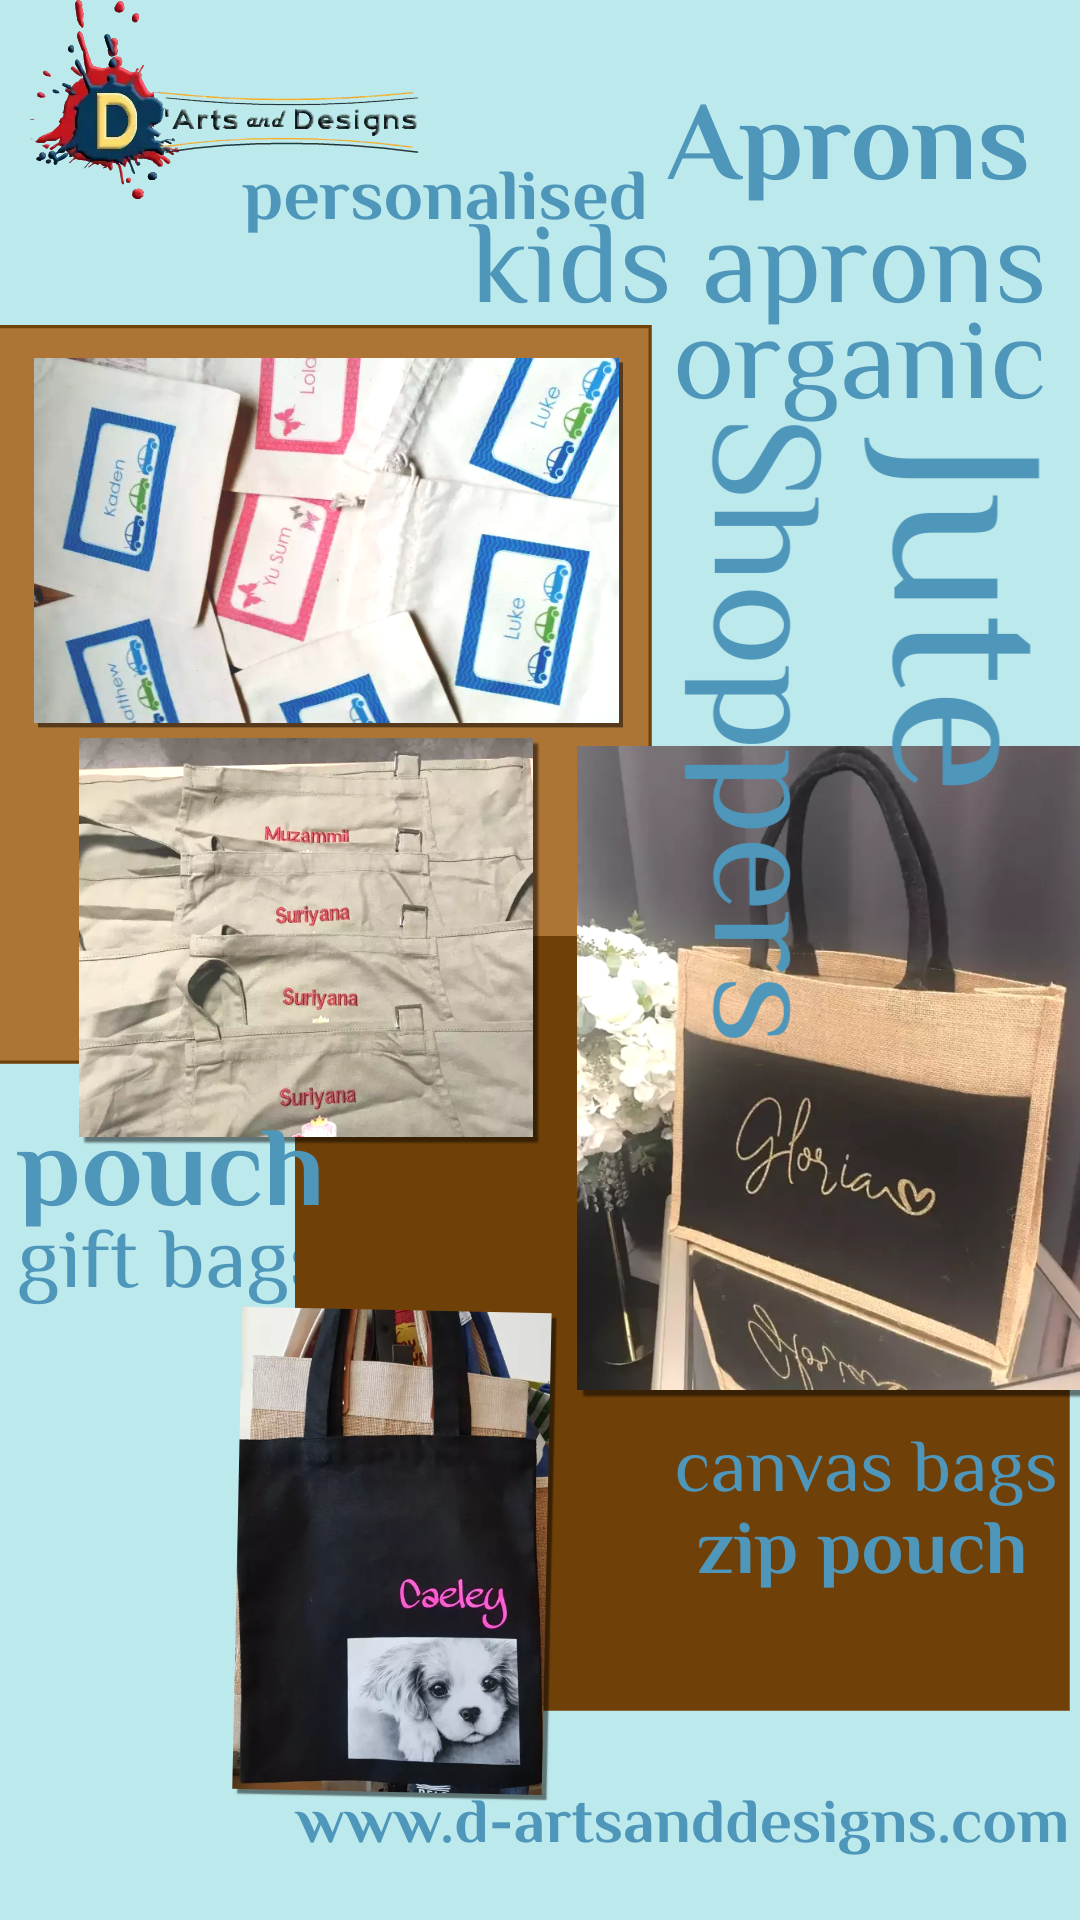 Make your Gift Special with Personalised Gift Bags